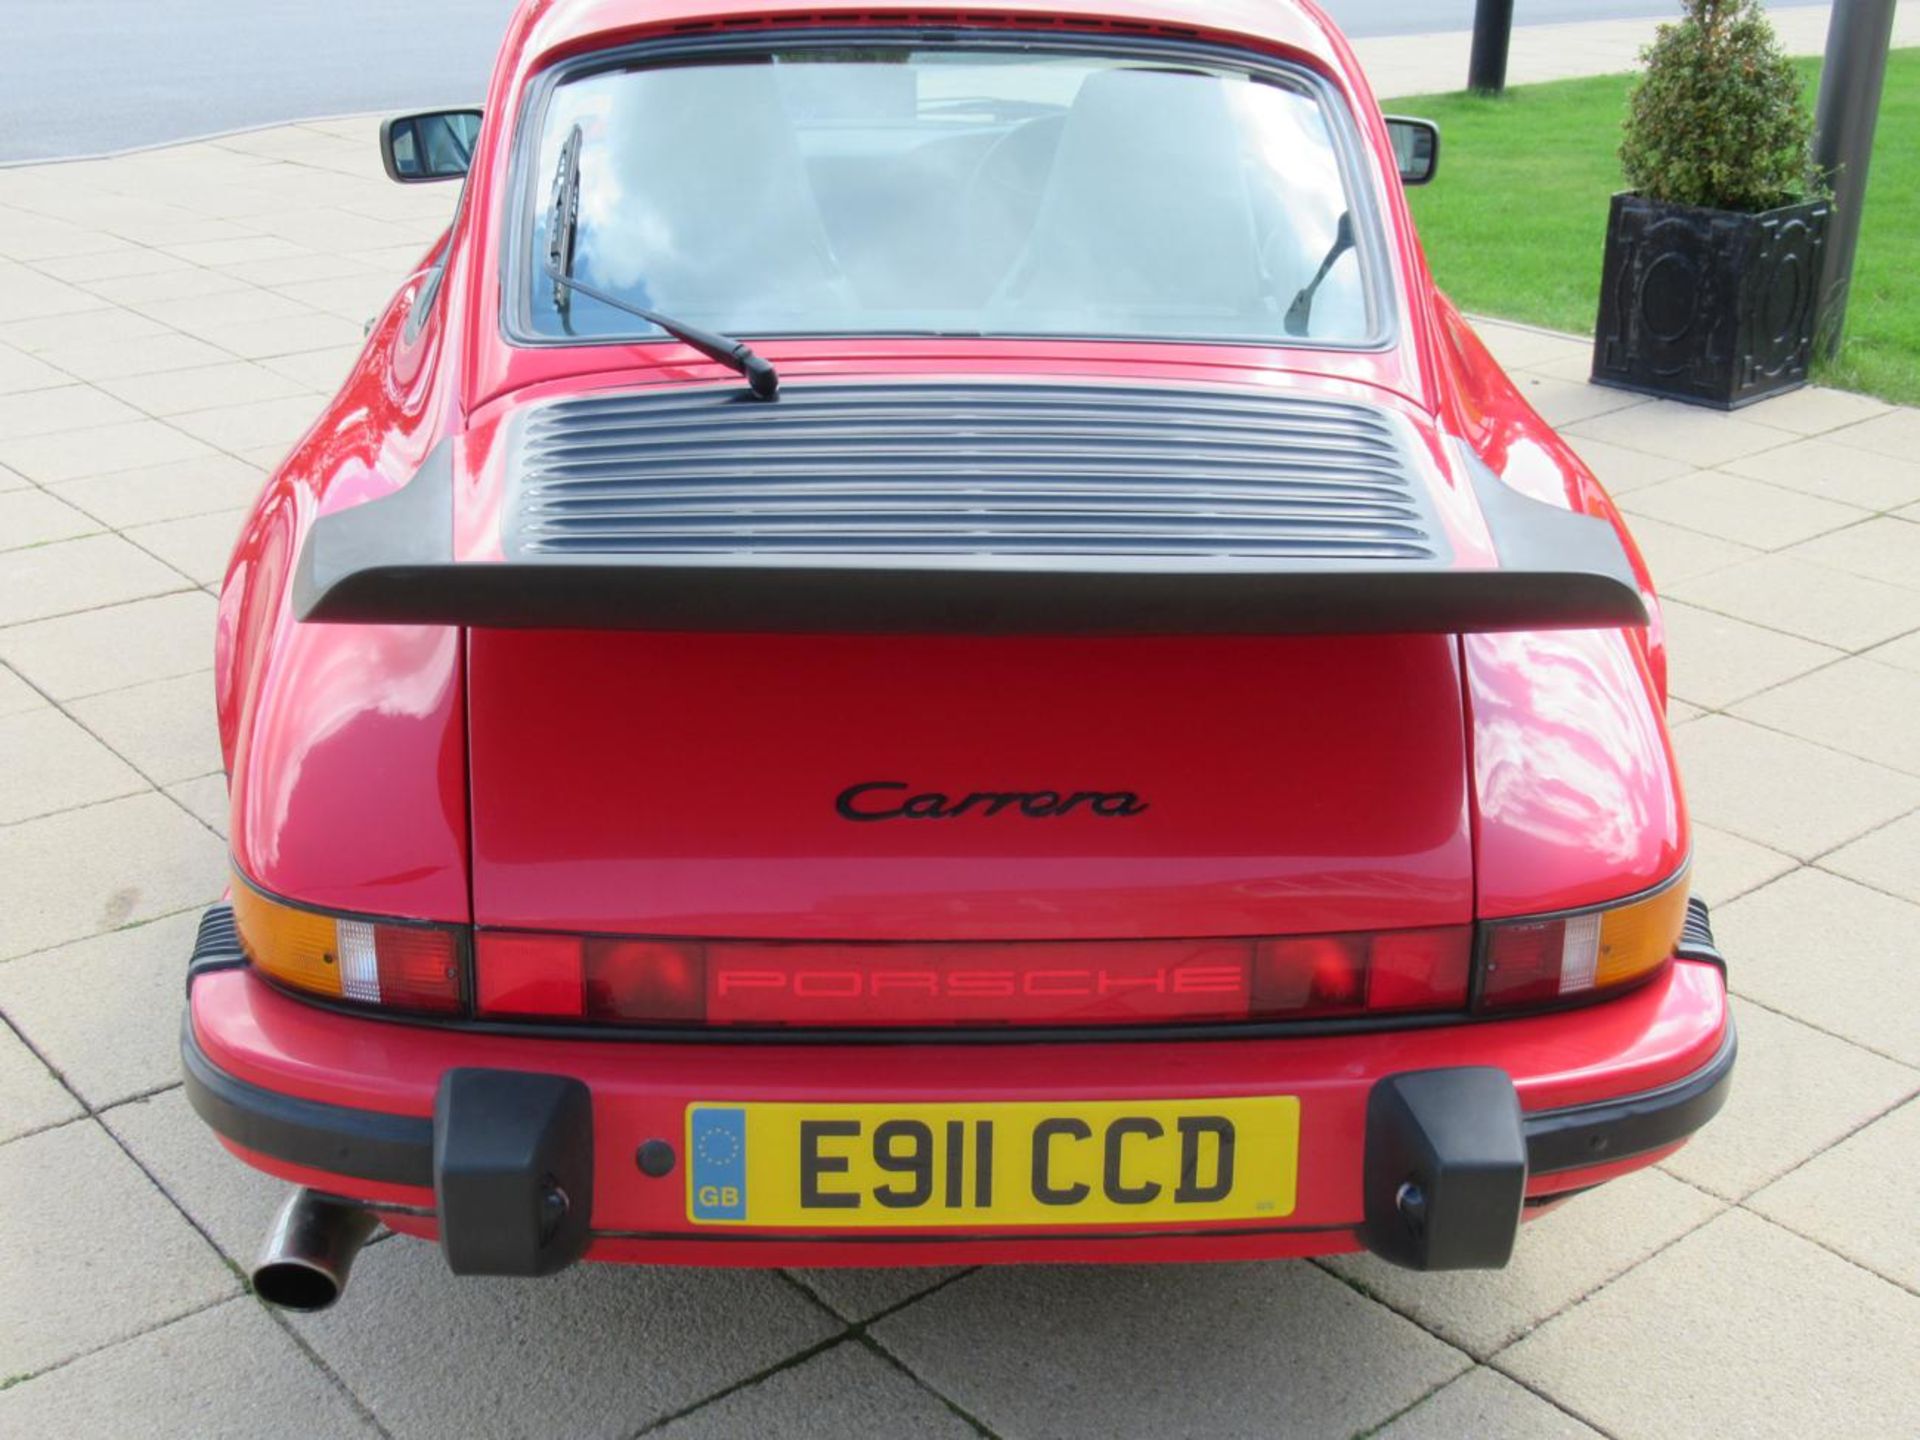 1987 Porsche 911 3.2 Carrera Coupe Registration number: E911 CCD (cherished number) Date of first - Bild 3 aus 6